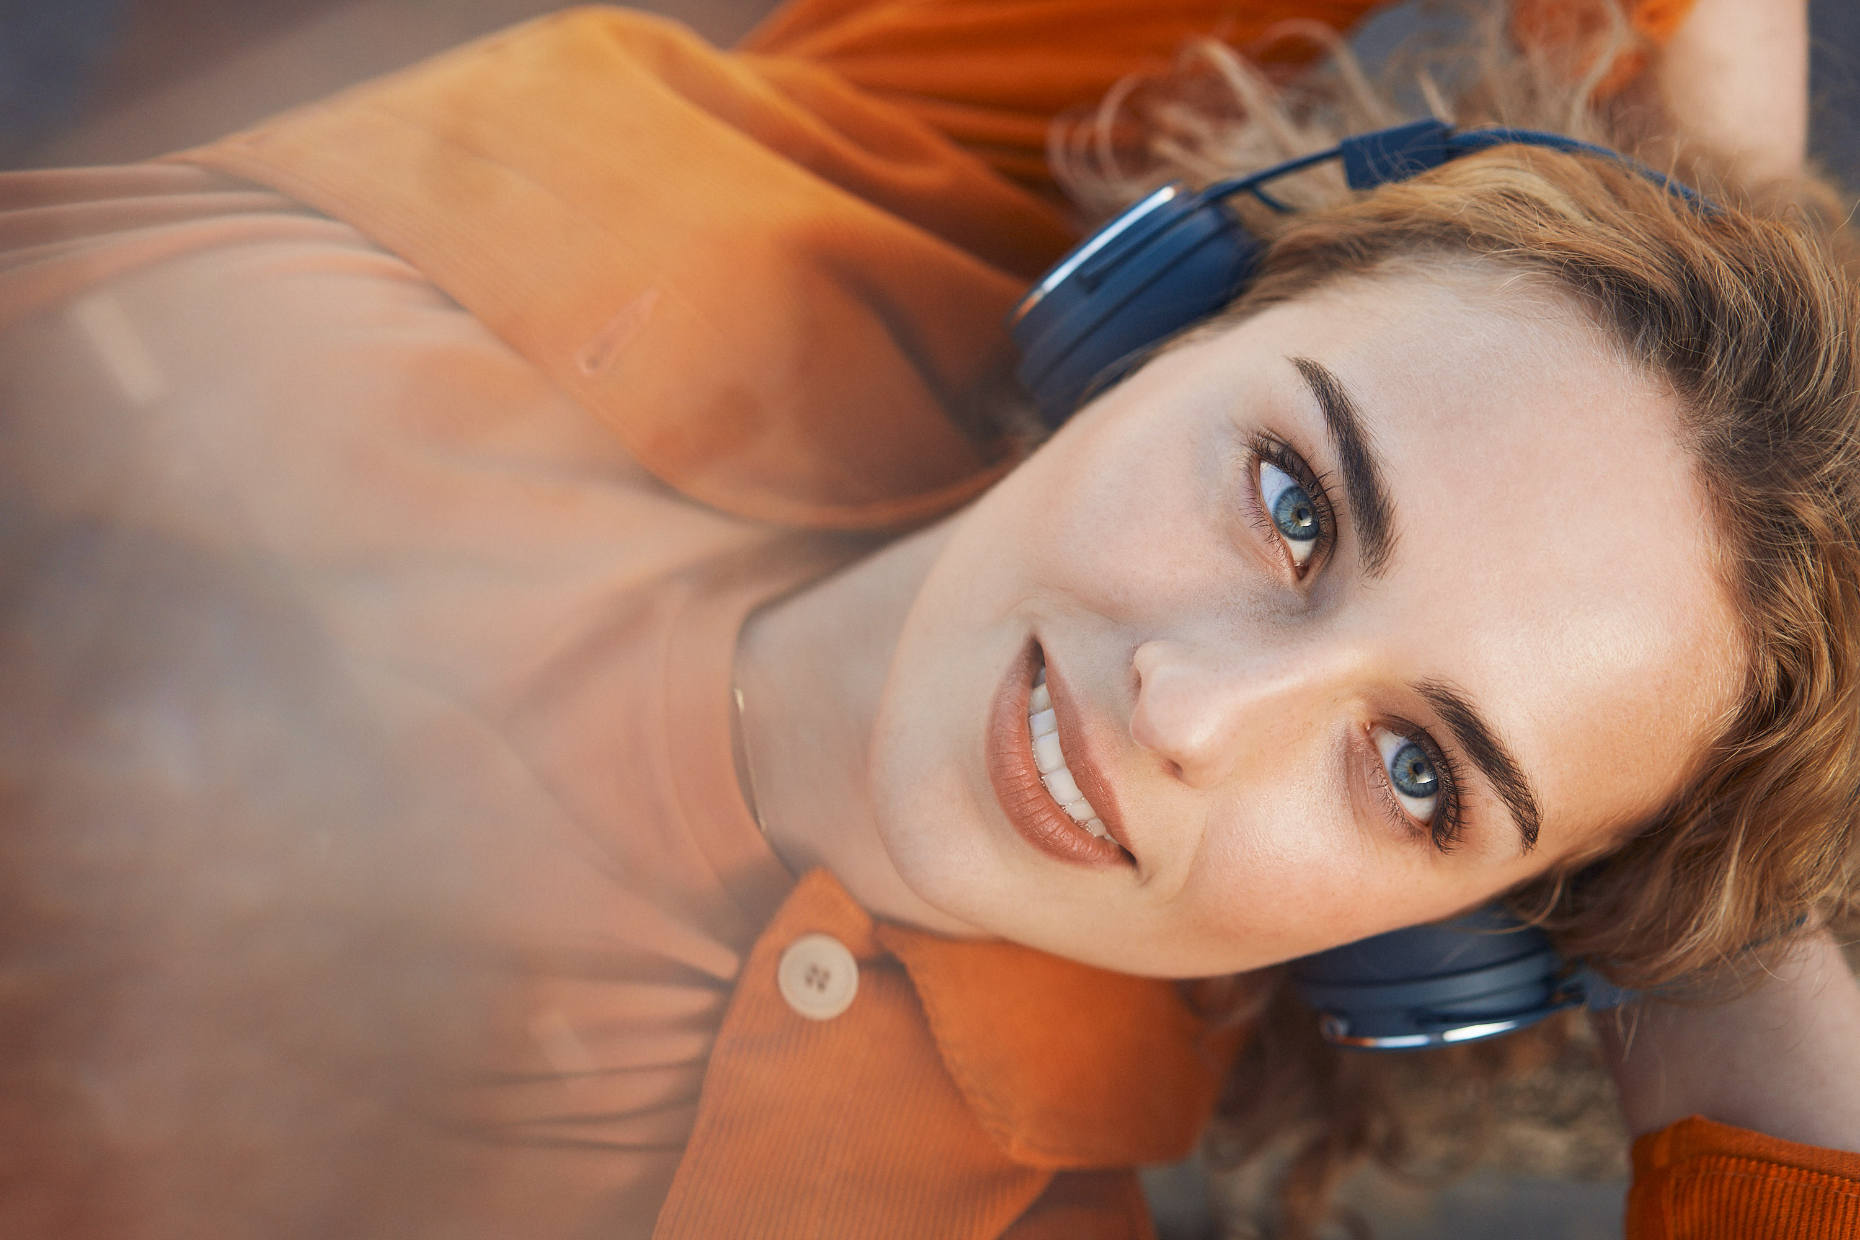 Smiling blonde woman with blue eyes wearing headphones with a visionary facial expression